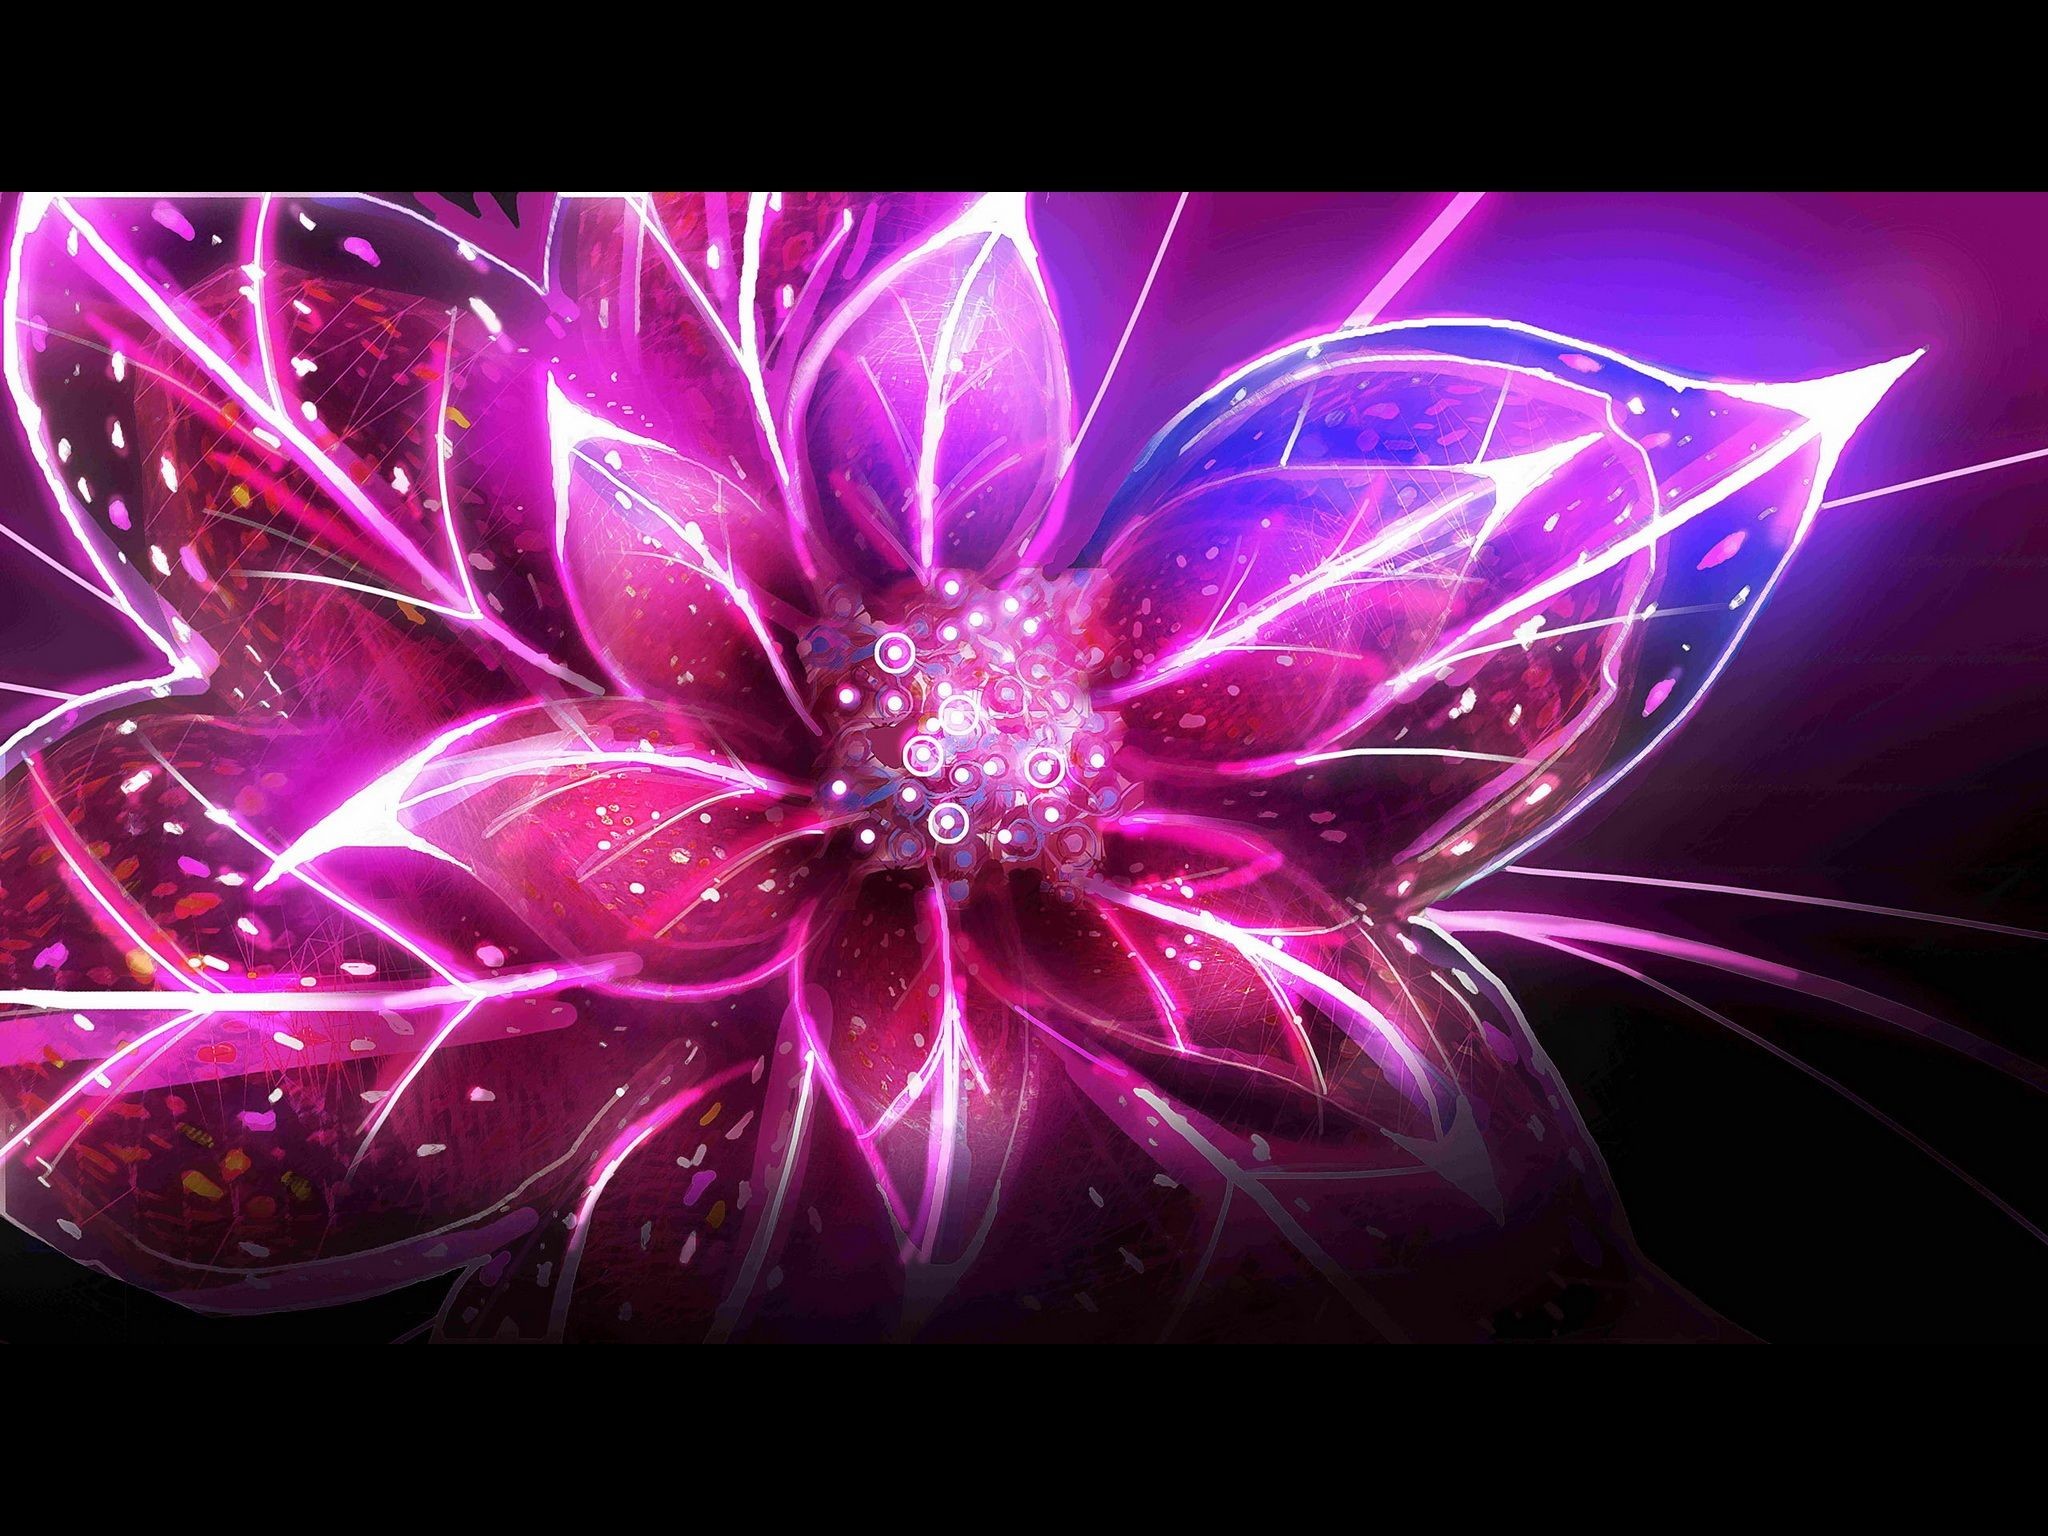 2048x1536 Abstract Fantasy Art Artwork Child Of Eden Colorful Flower Pink Purple Blue  HD Wallpaper Res: